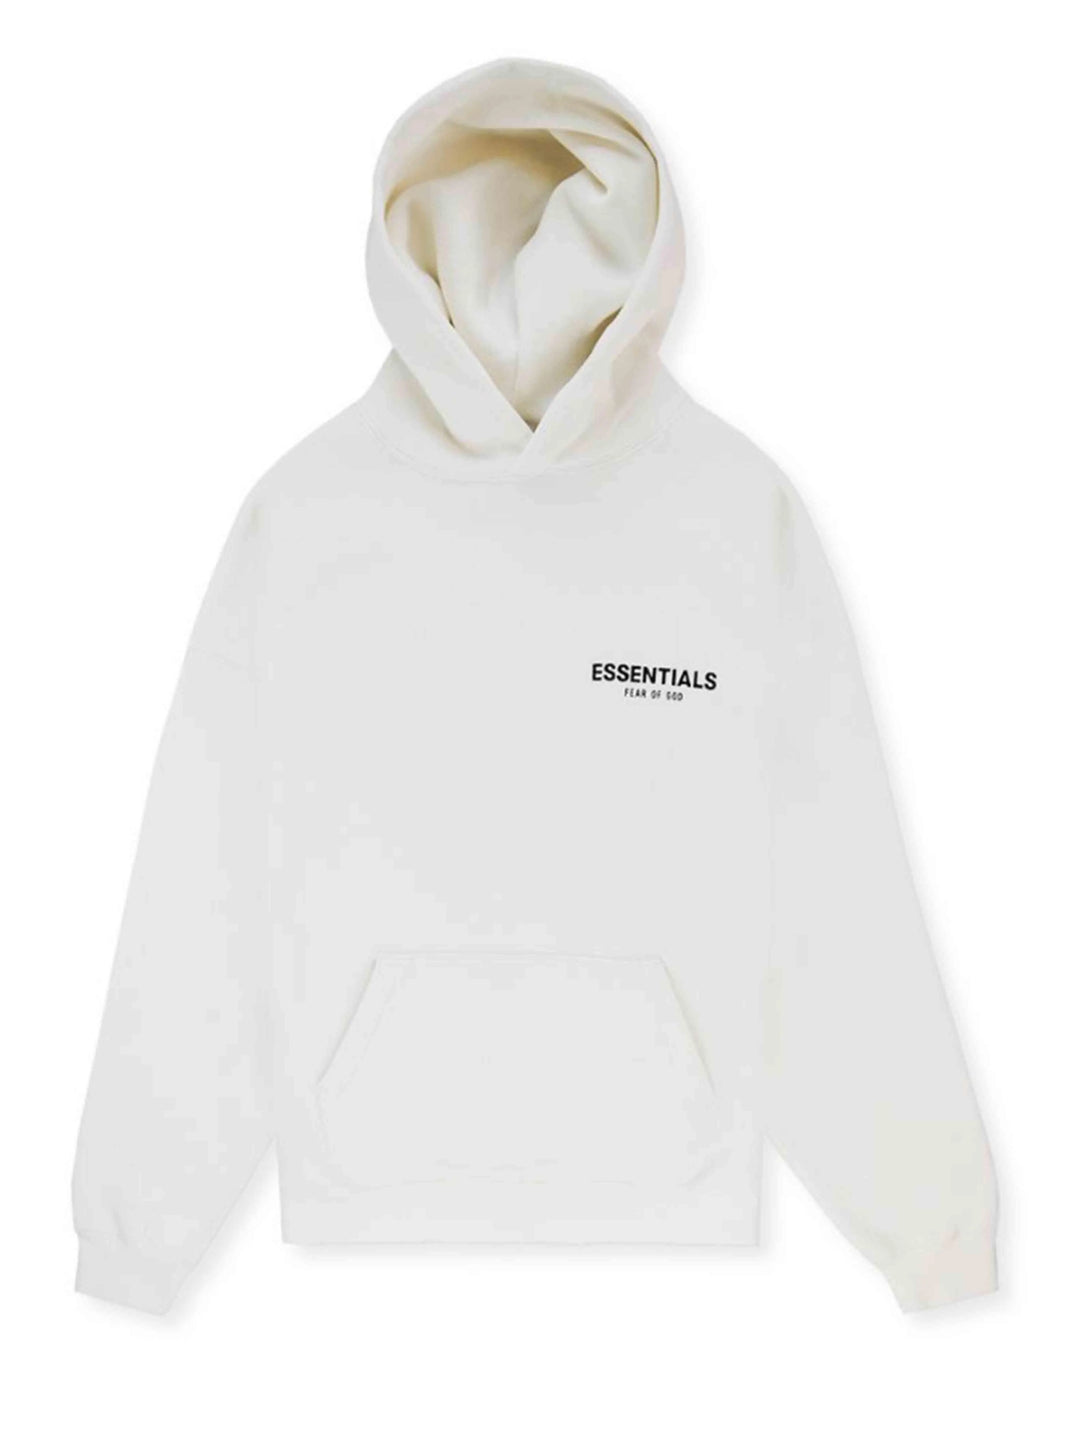 Fear Of God Essentials Photo Hoodie White [FW19] Prior